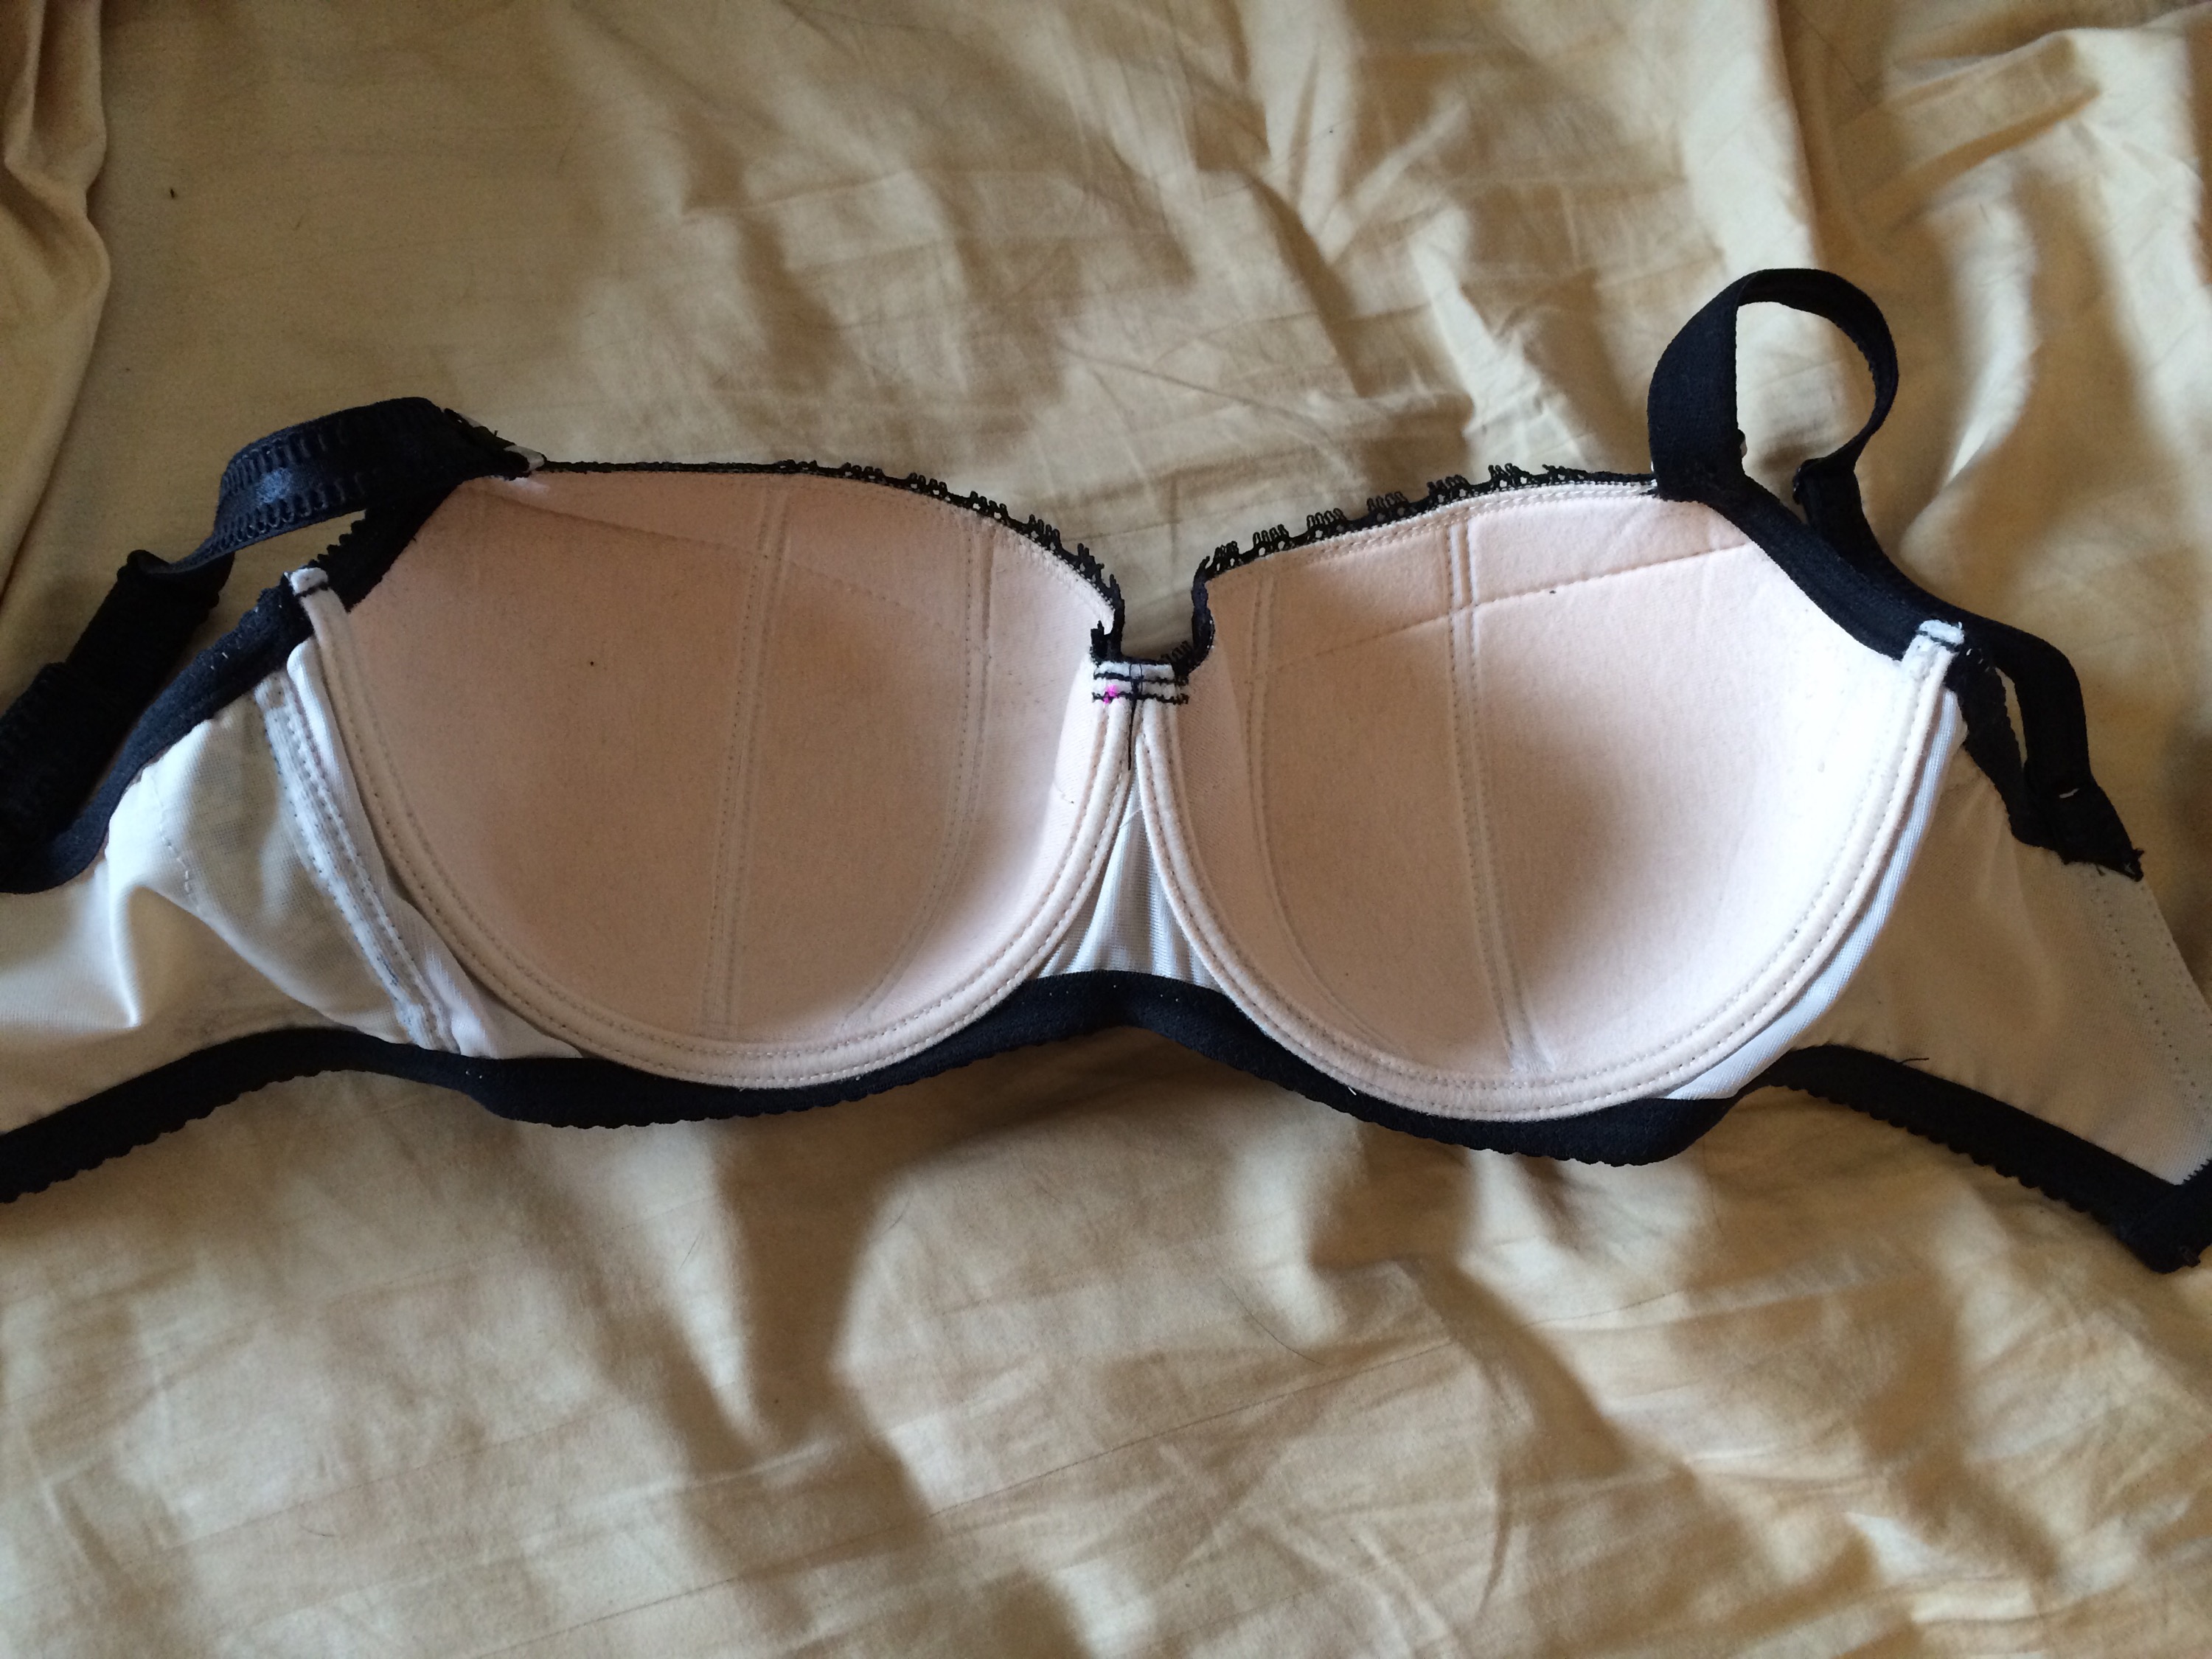 Review: Comexim Beauty Halfcup in 65J – A Tale of Two Boobs.